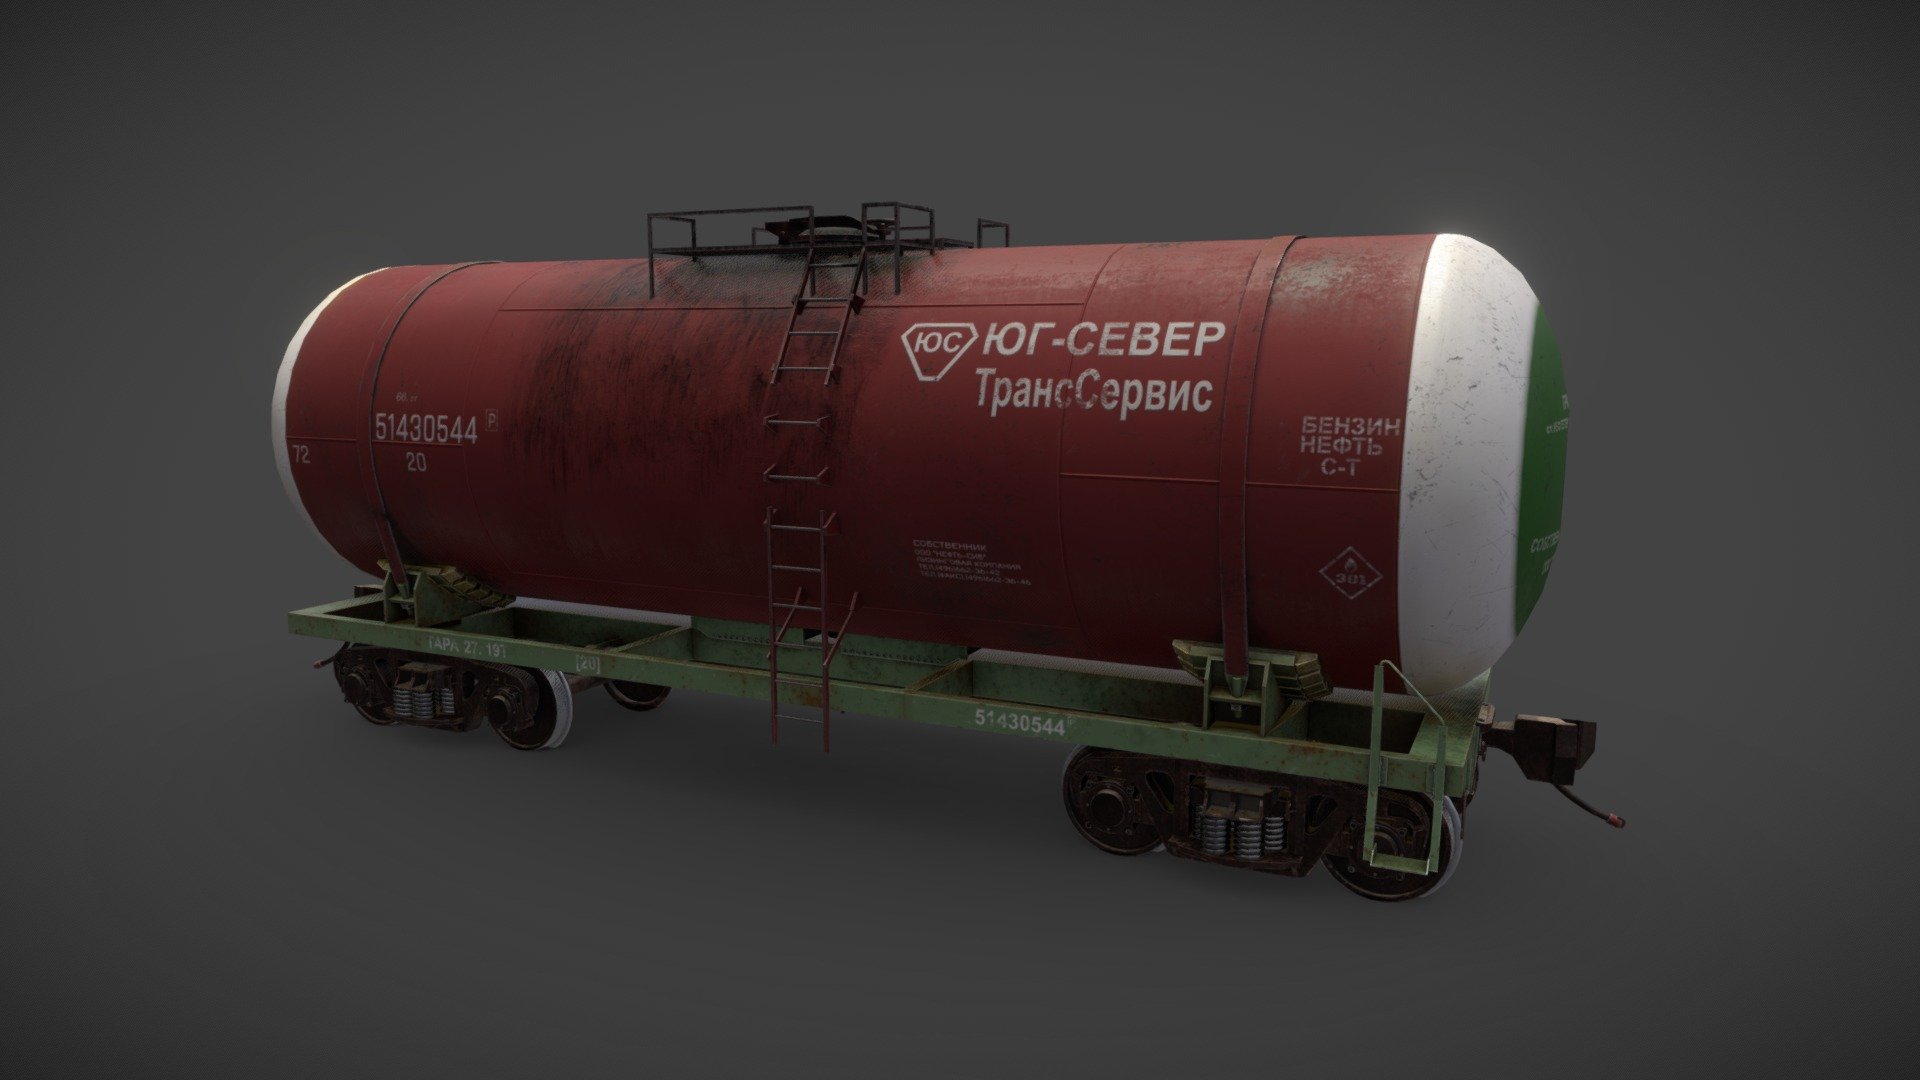 Game low-poly 3d-model of old railroad tank wagon.

Intended for game/realtime/background use

Description: The model was created in Blender In the file only the model itself The model is accurate to the real-world scale All names on the car were invented by me

Polycount:

50.792 tris
27.654 verts
4 High Quality texture sets(4096x4096) 3d model